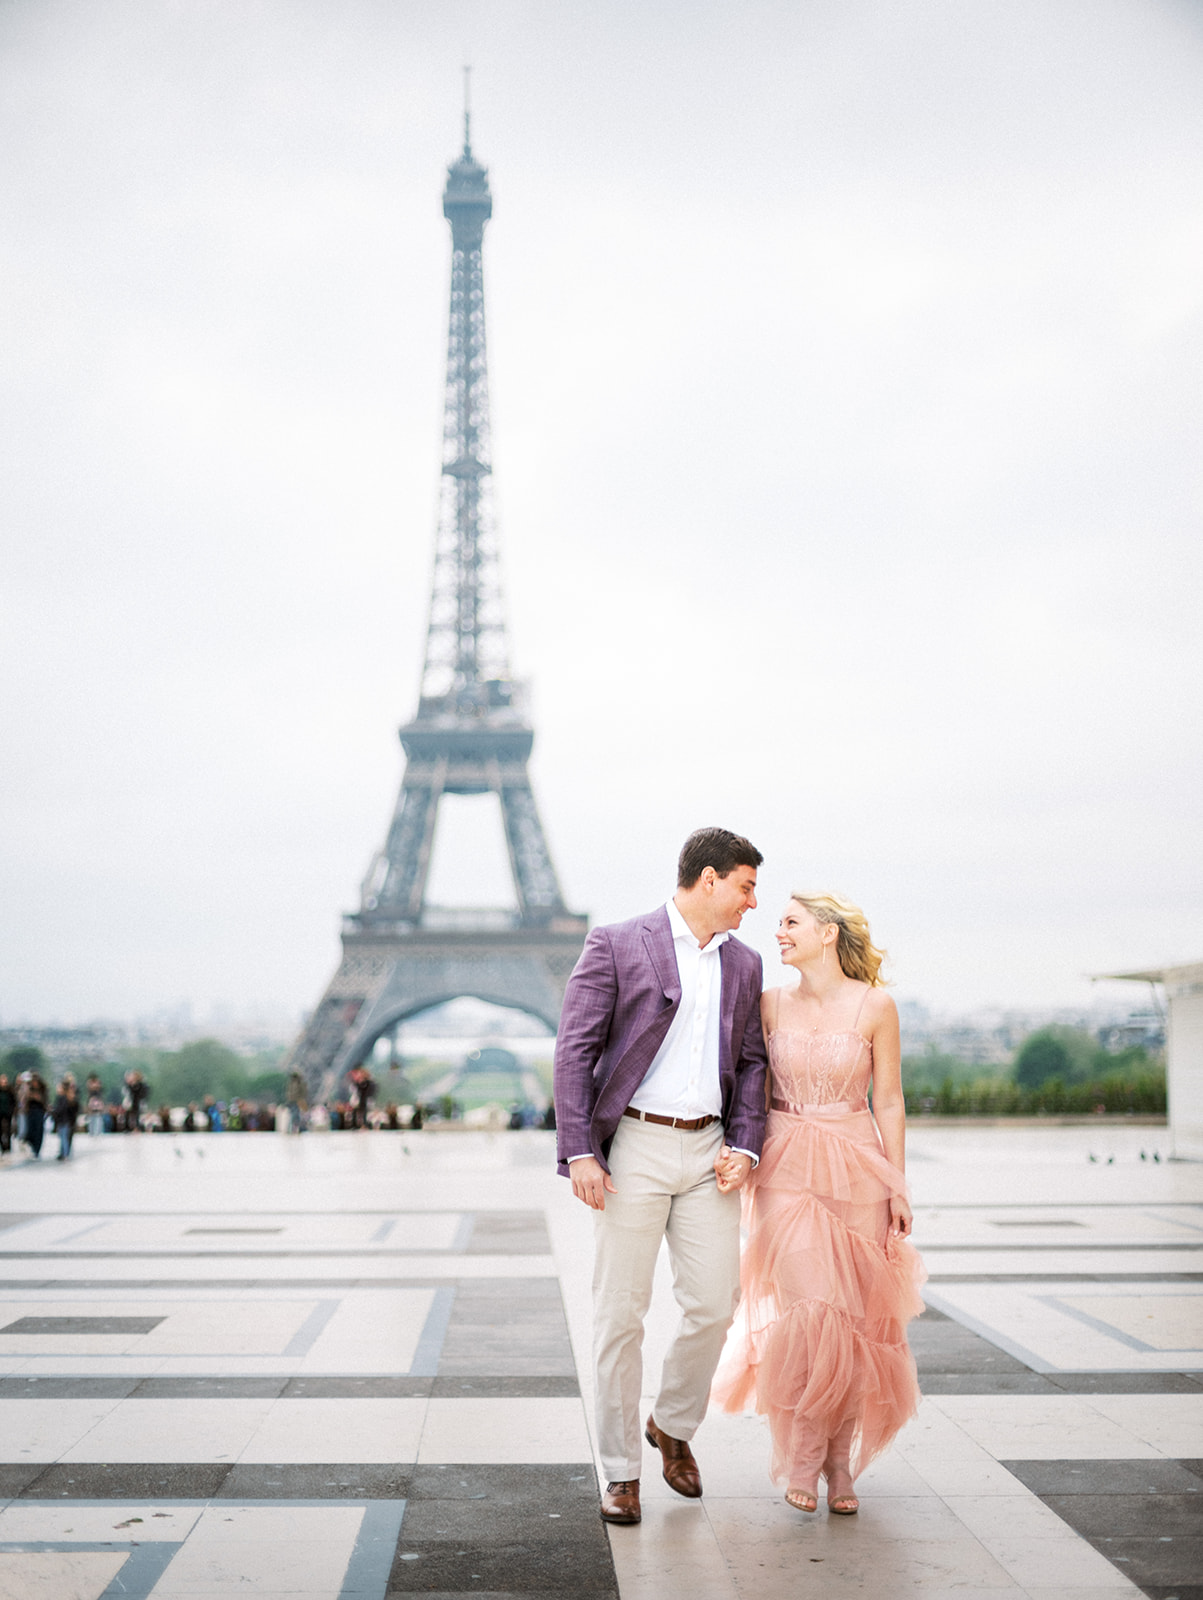 Couple walking away from the Eiffel Tower.